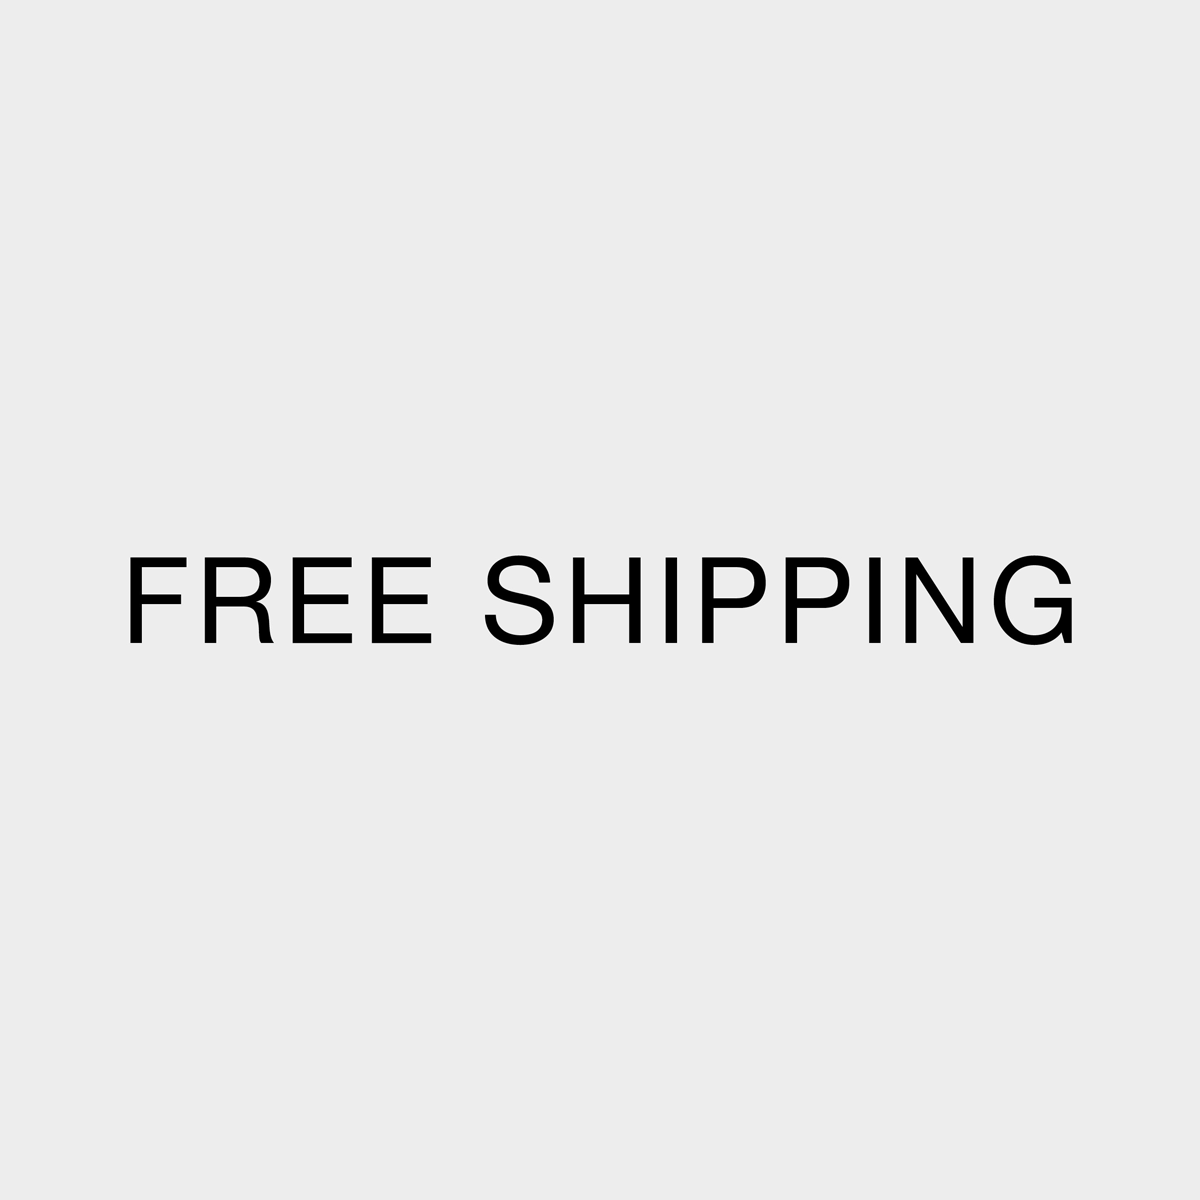 Back to Work: Free Shipping Promo